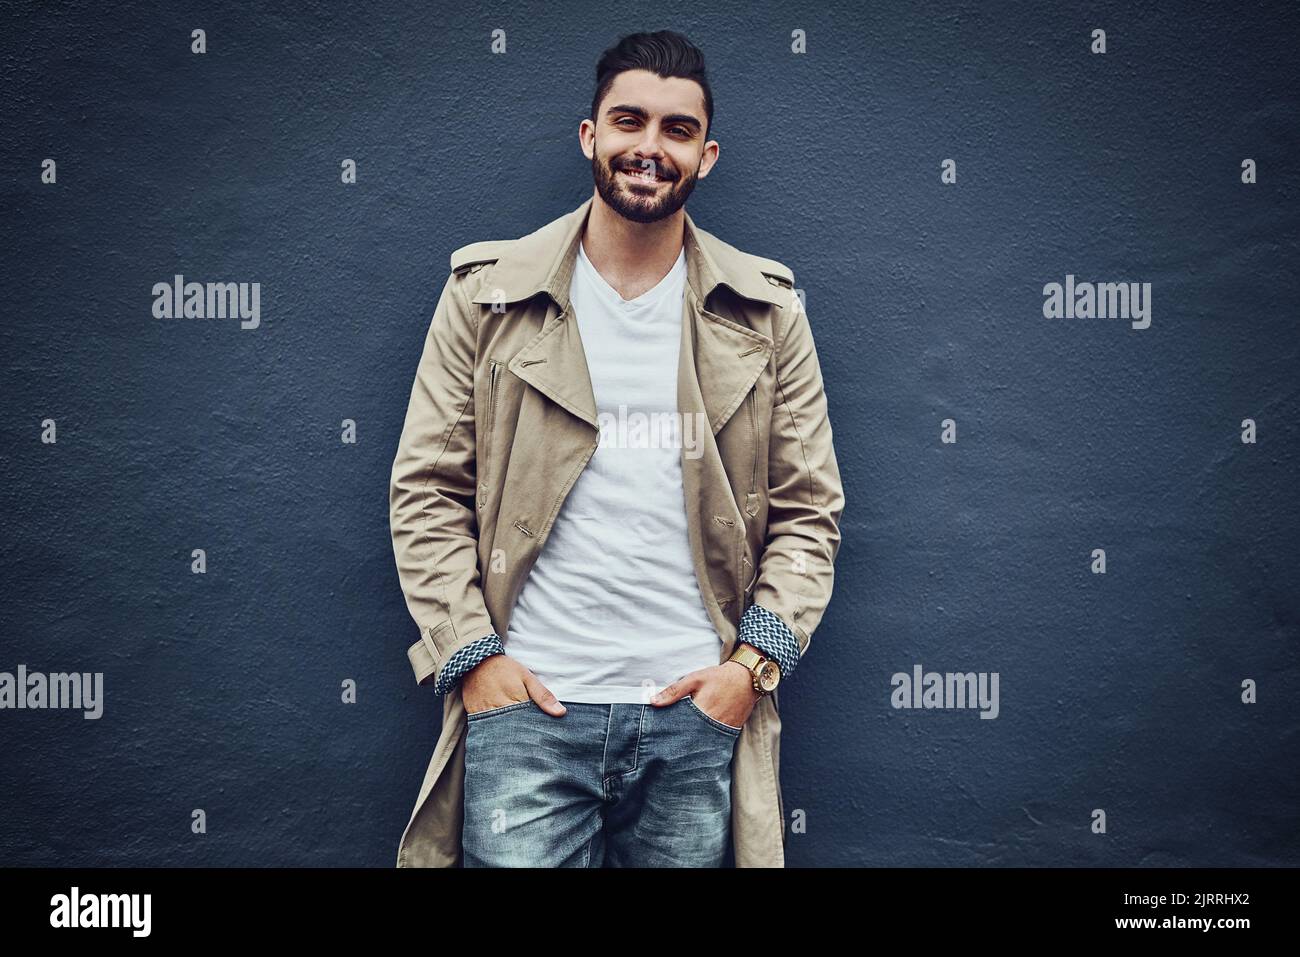 Streetwear - understated yet stylish. Portrait of a fashionable young man wearing urban wear and posing against a gray wall. Stock Photo